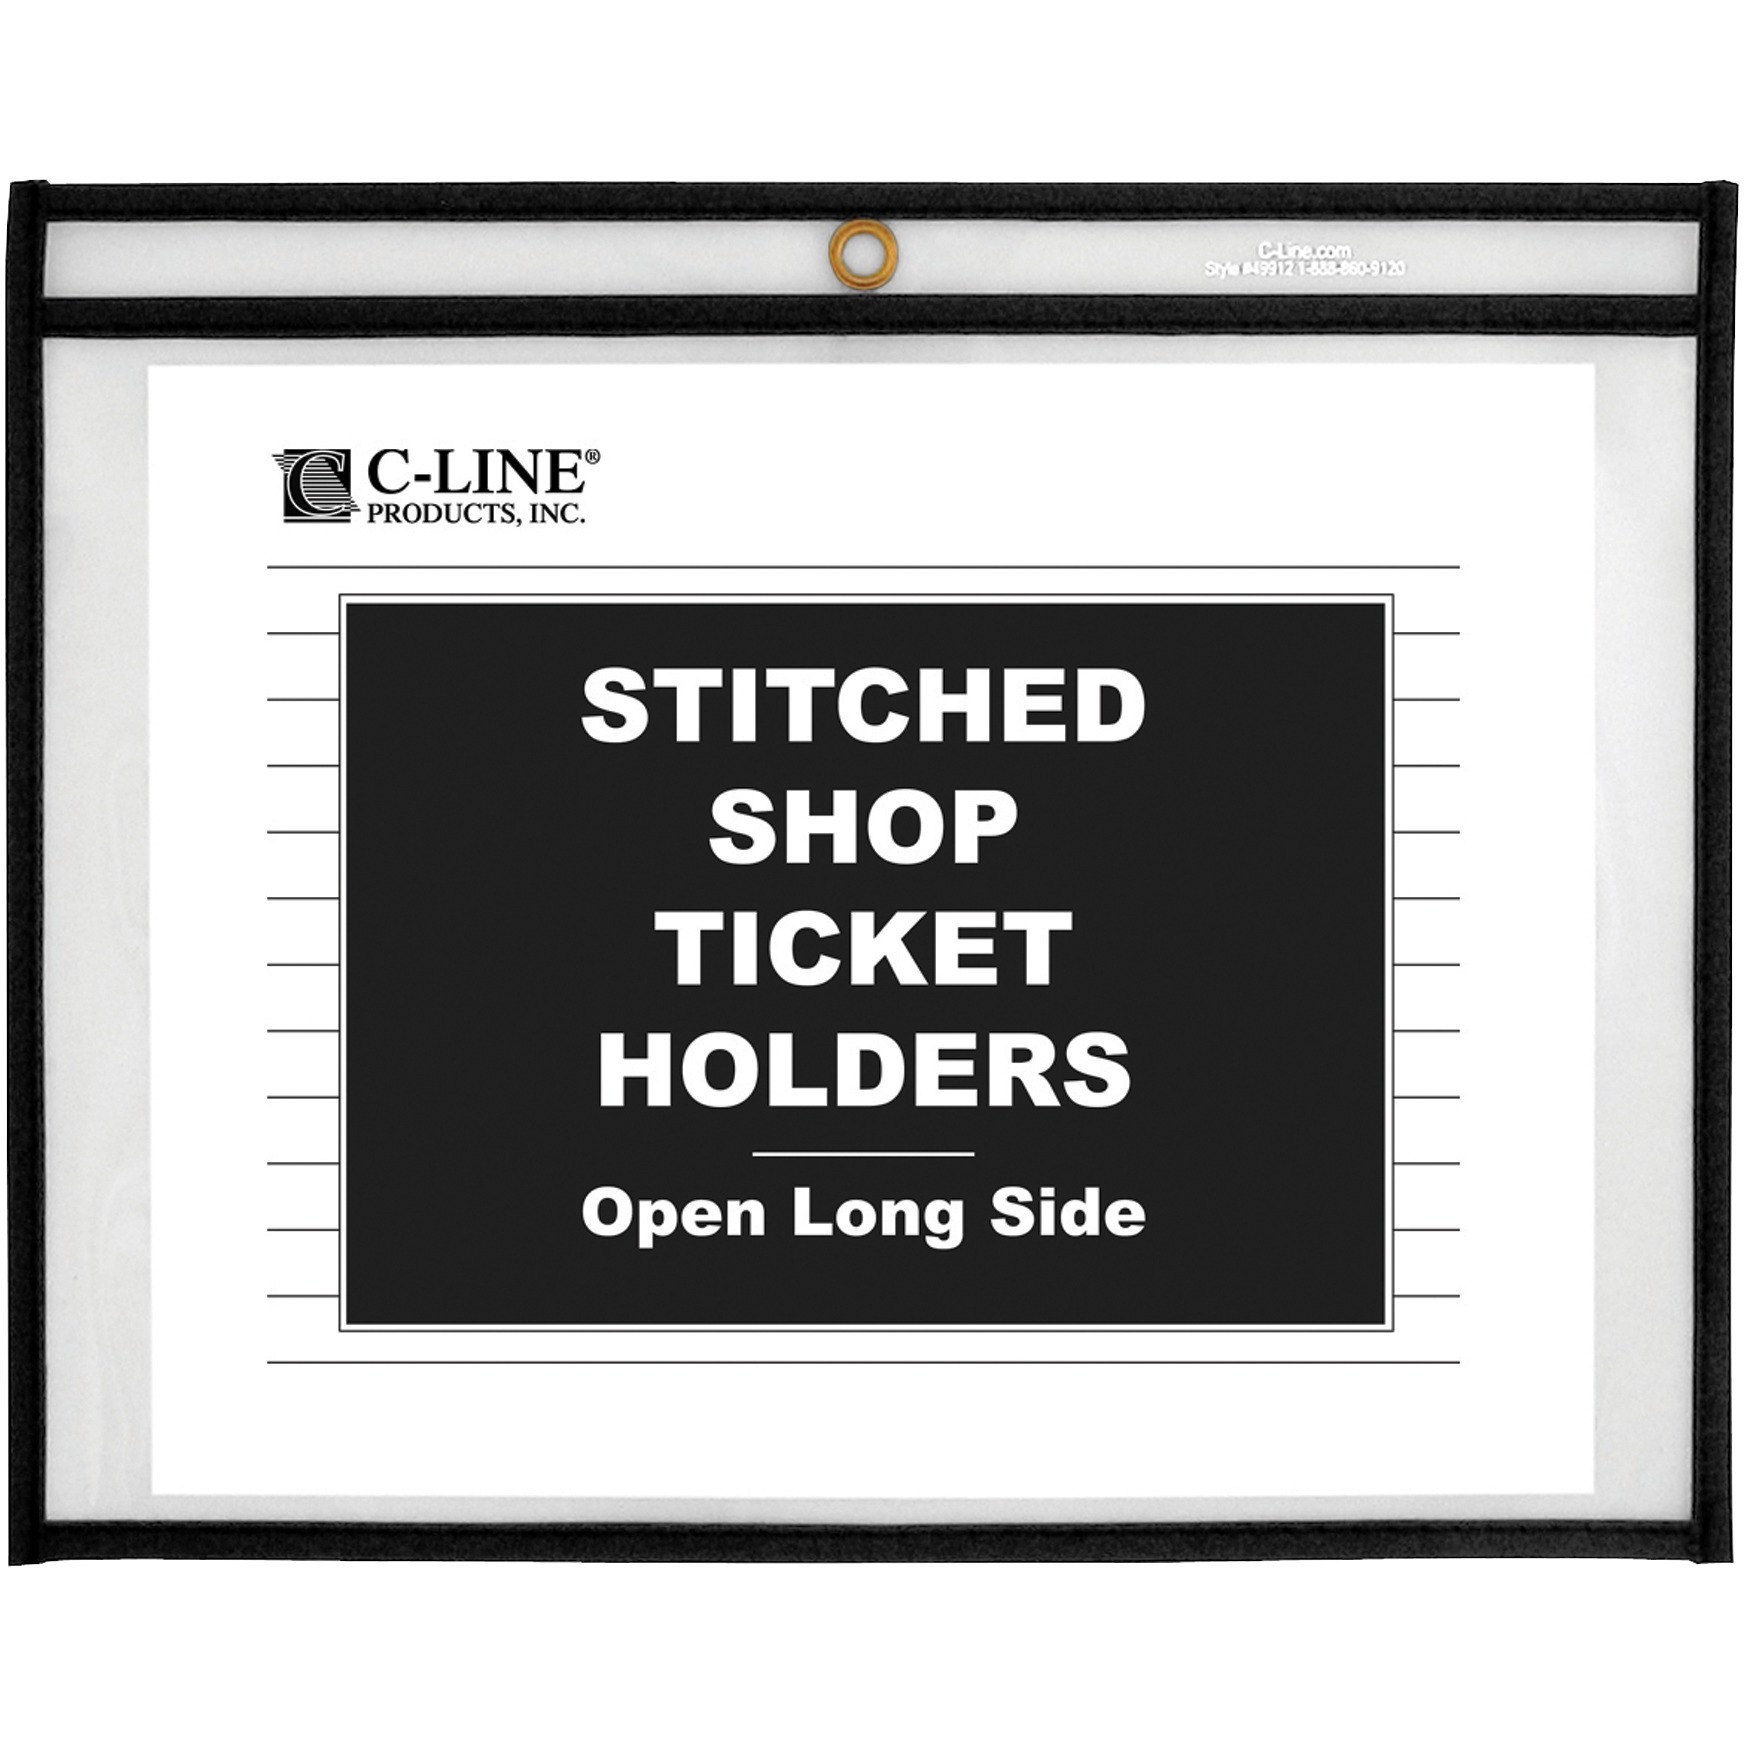 Shop Ticket Holders, Stitched, Sides Clear, 50", 11 x 8 1/2, 25/BX